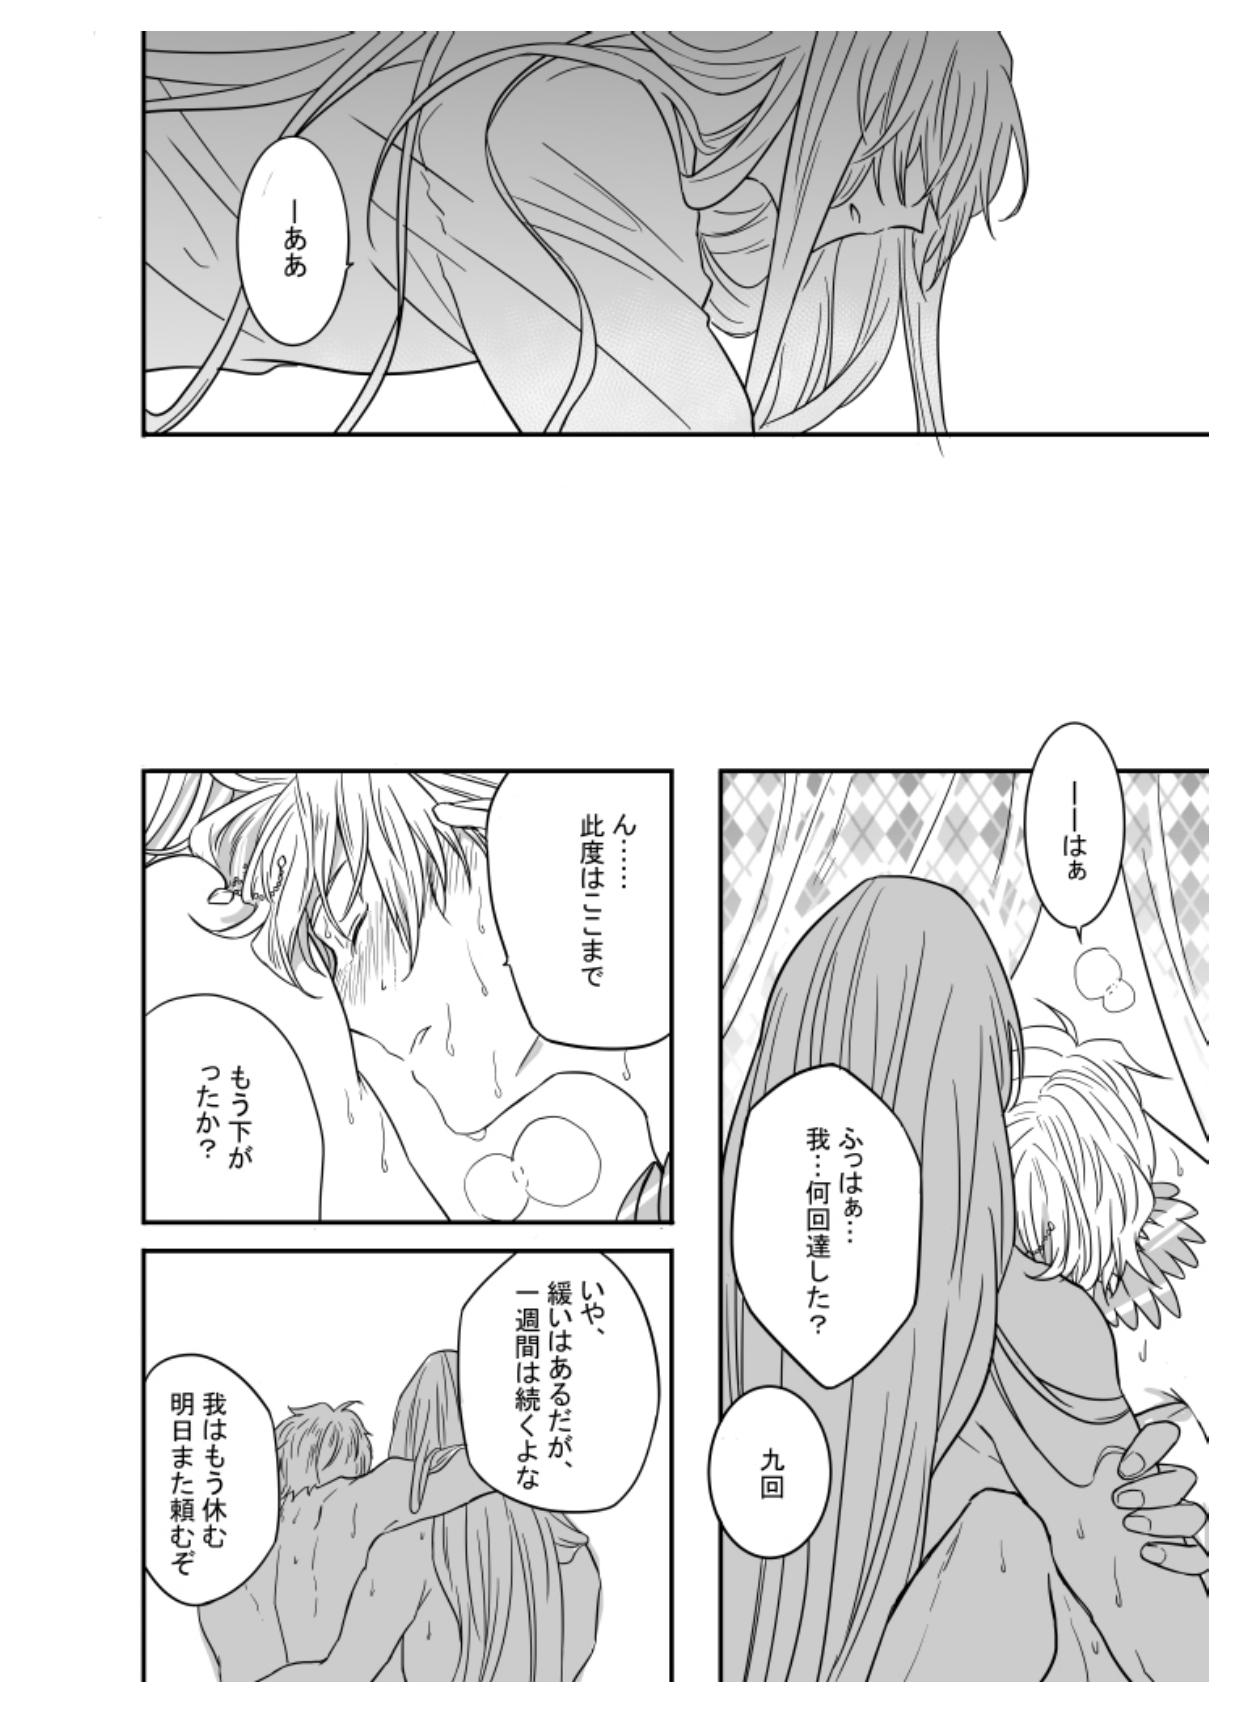 Piercings If I have soul - Fate grand order Real Couple - Page 8